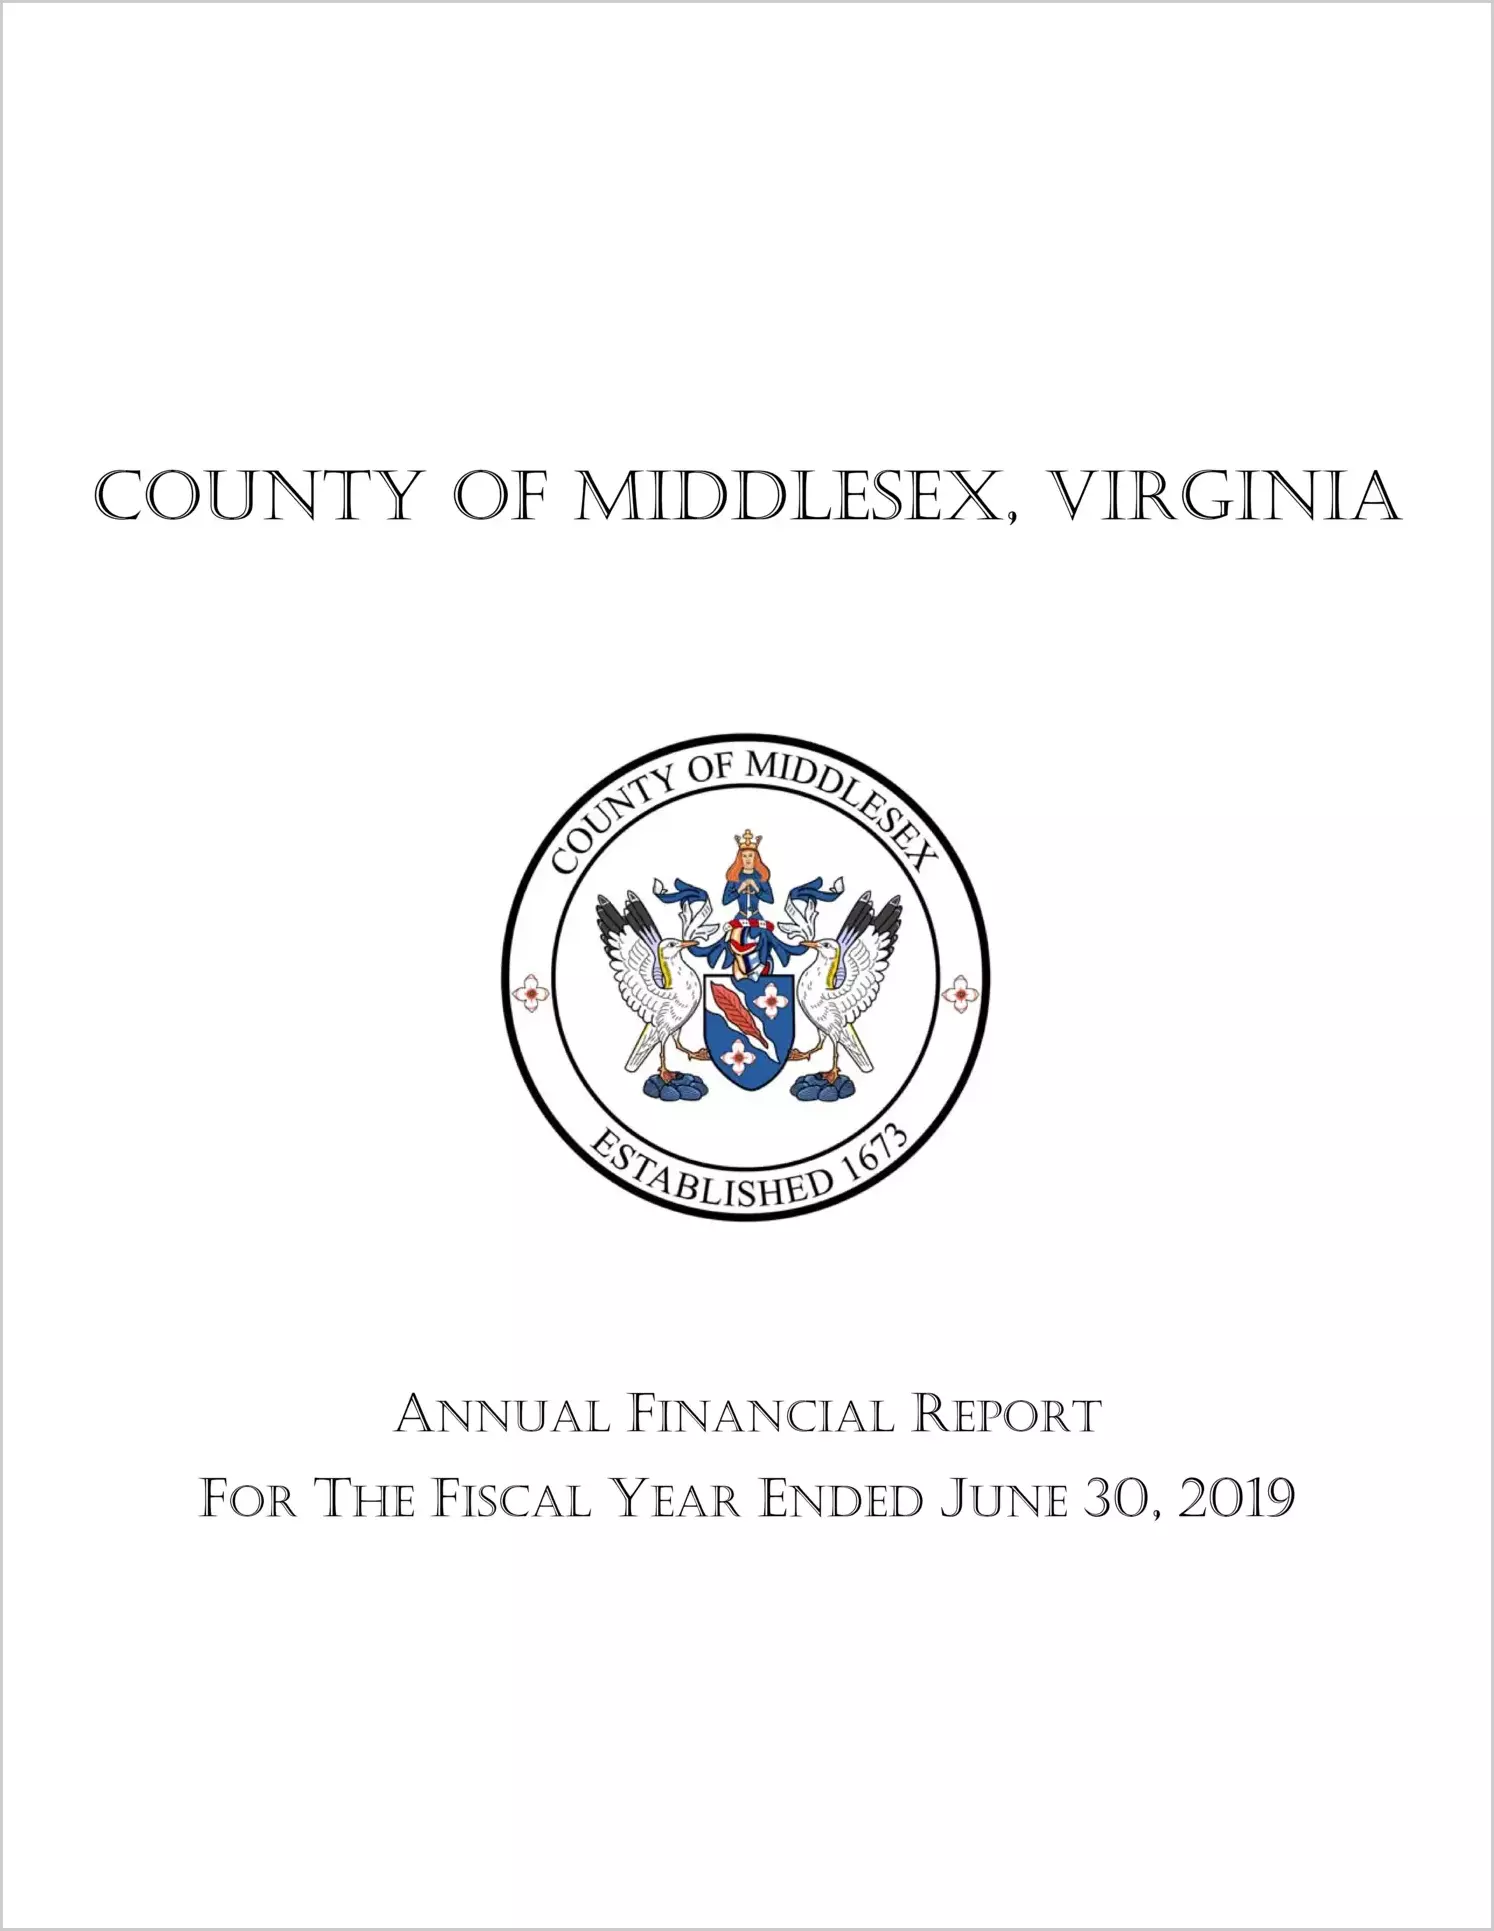 2019 Annual Financial Report for County of Middlesex